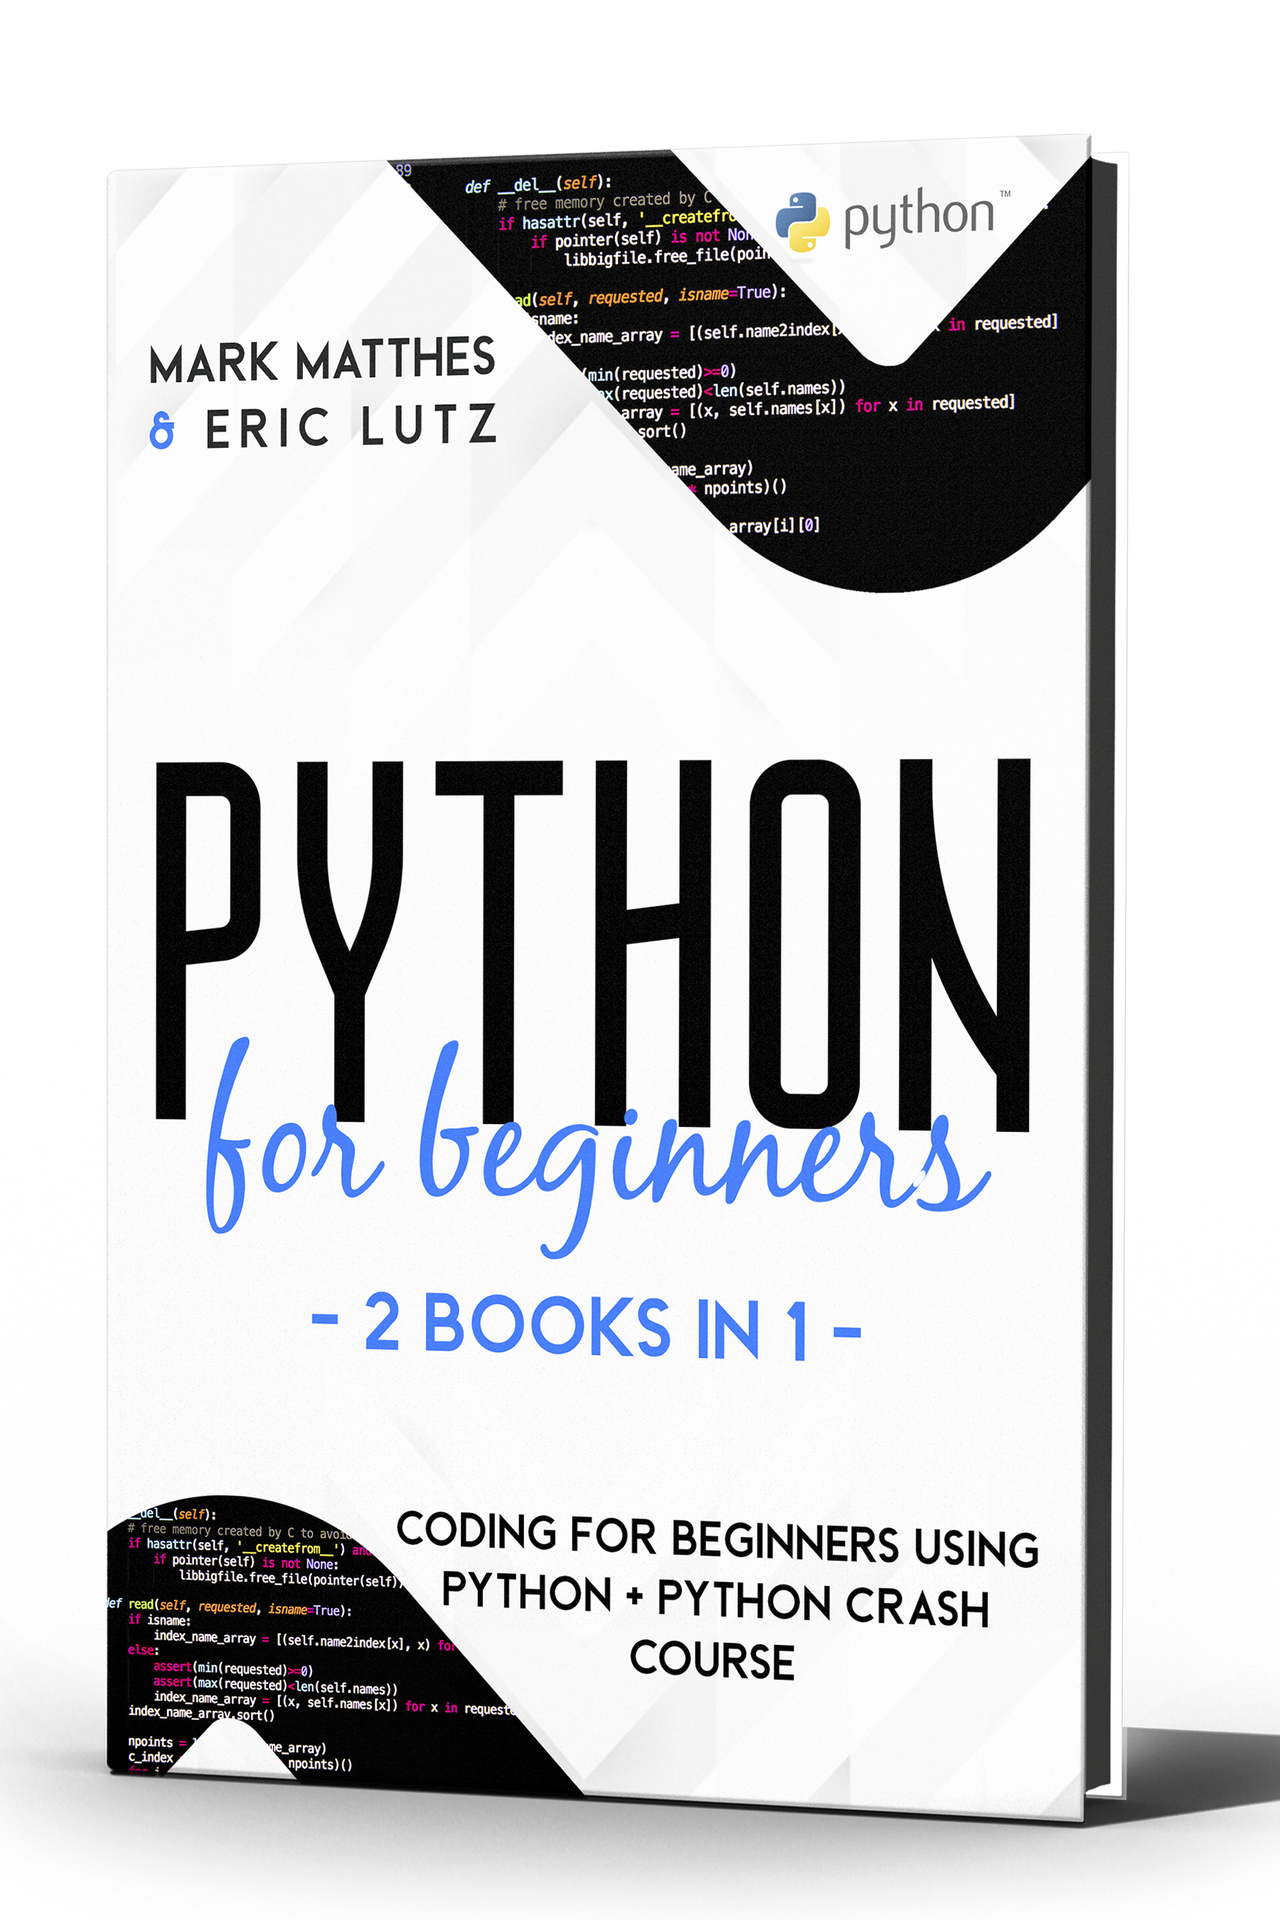 Python for Beginners - 2 Books in 1: Coding for Beginners using Python + Python Crash Course